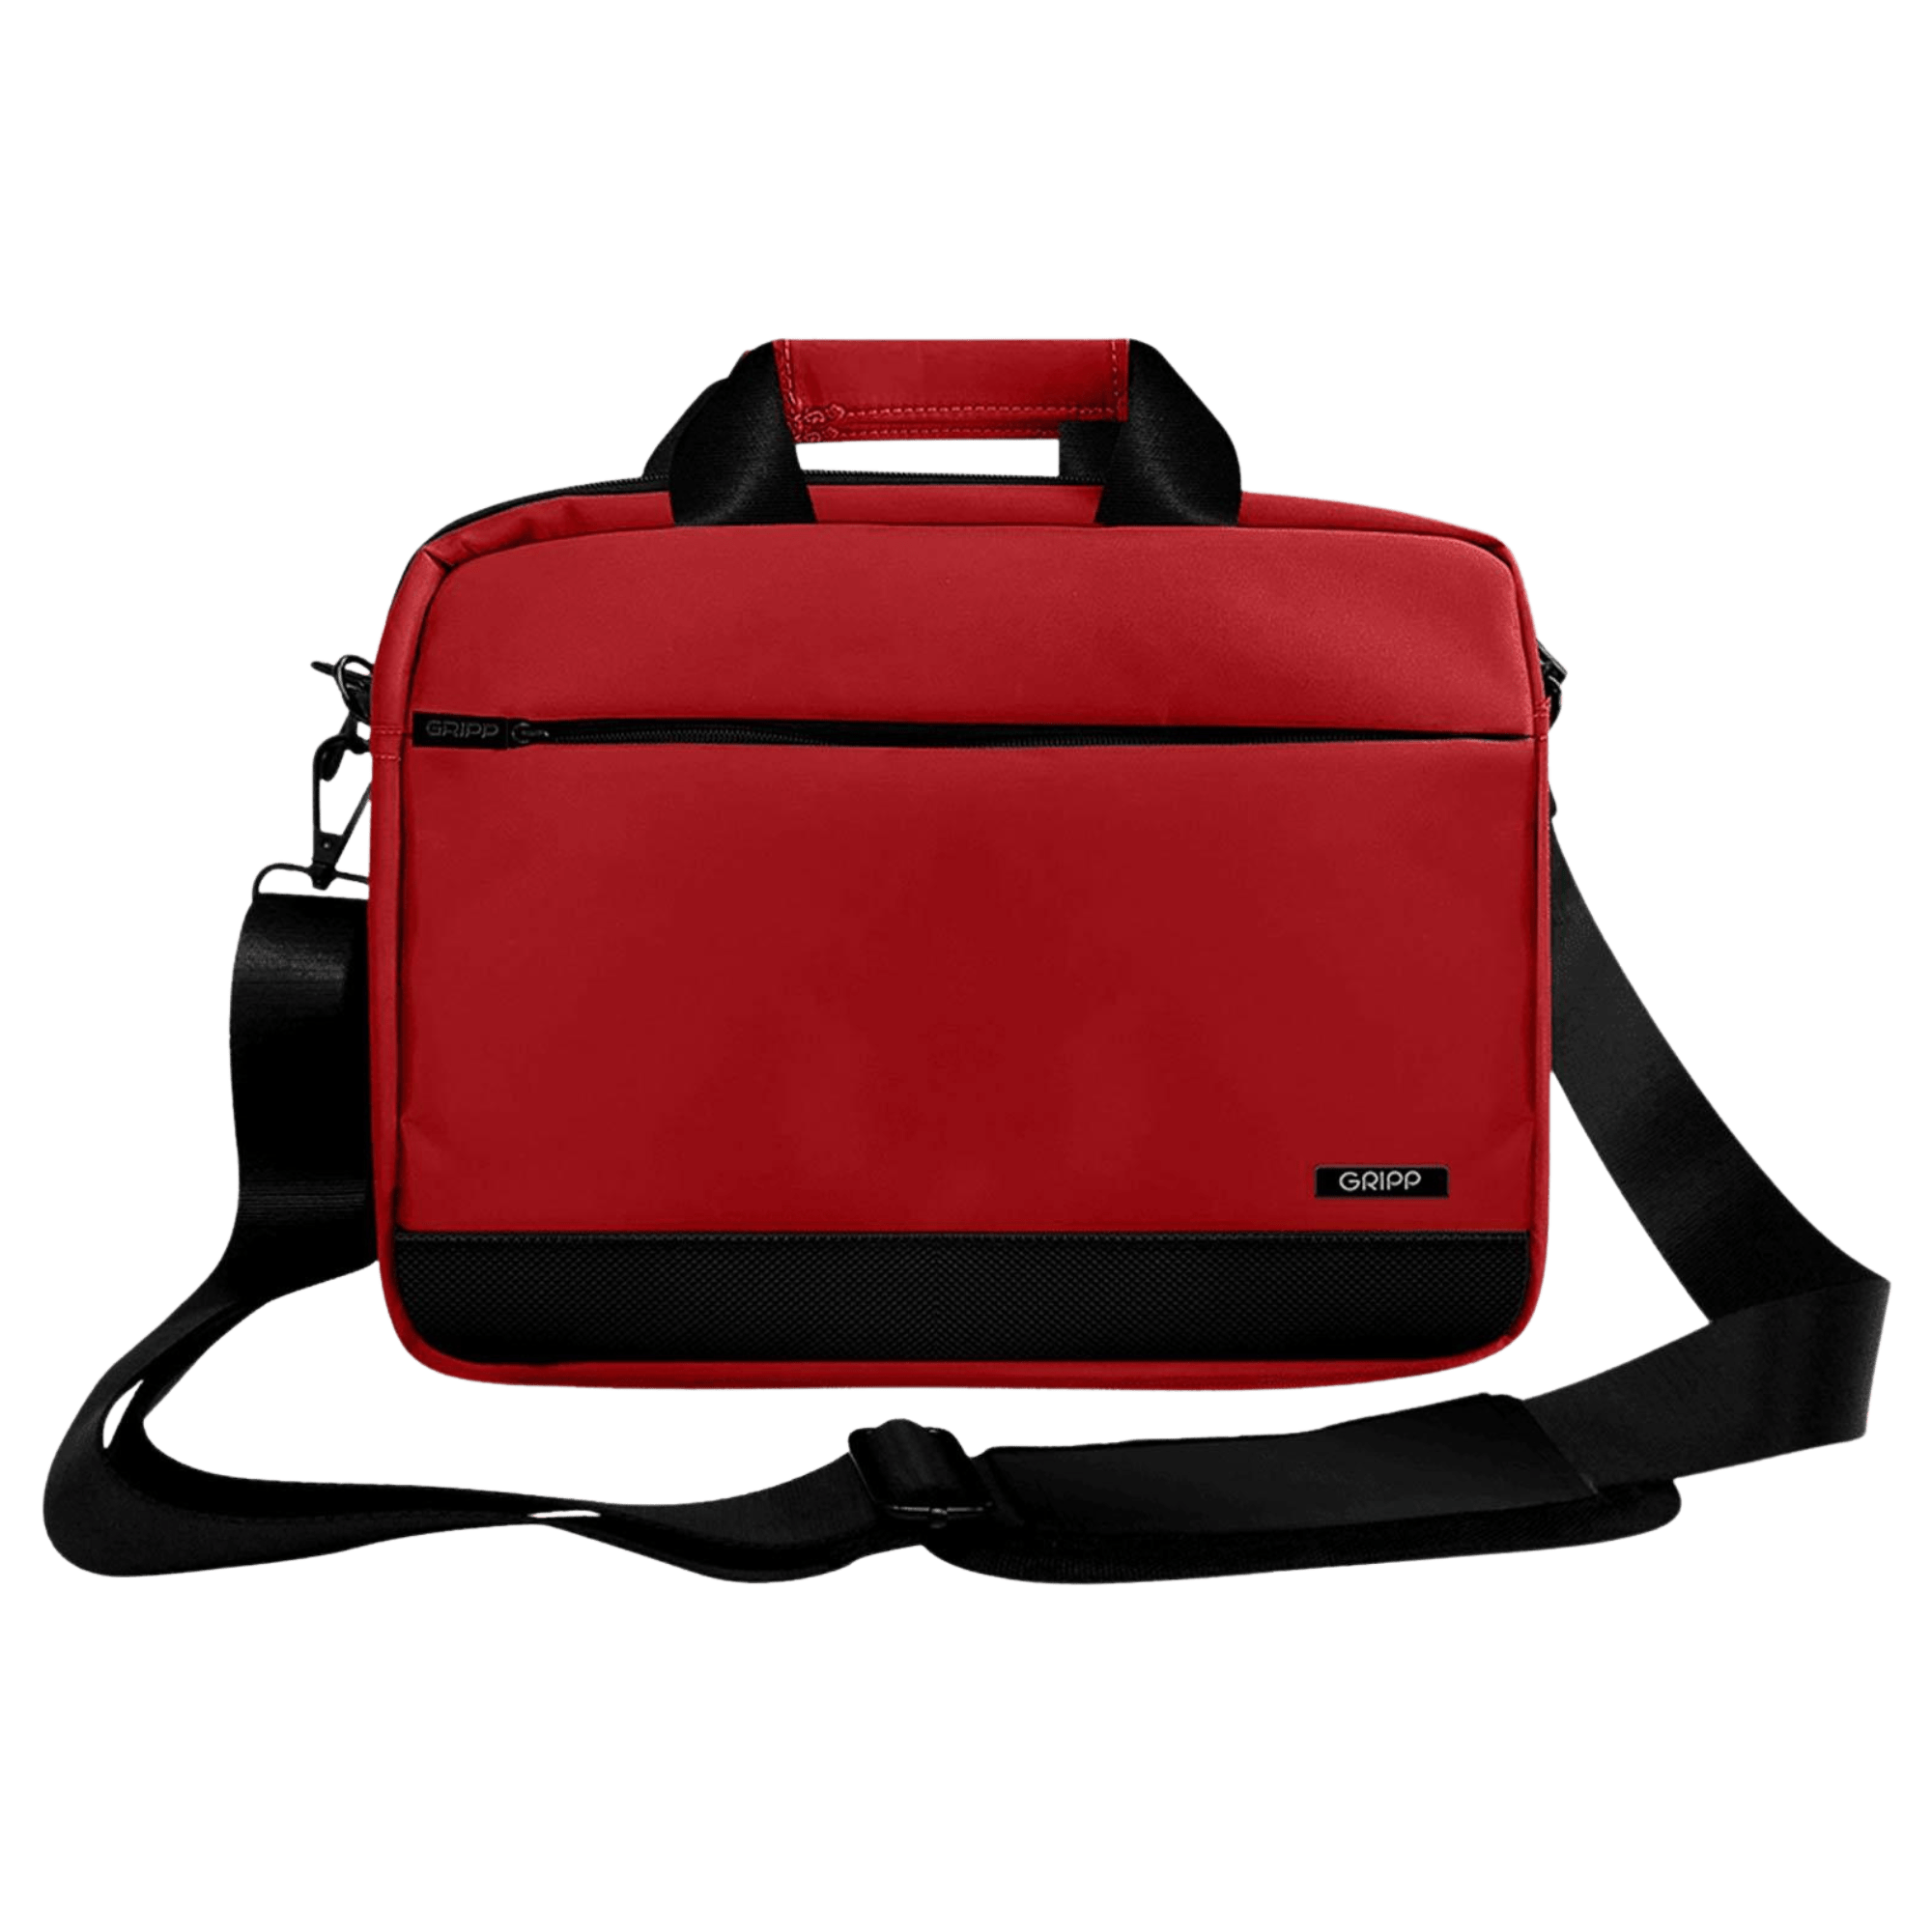 Belkin Laptop Cases and Bags for sale | eBay